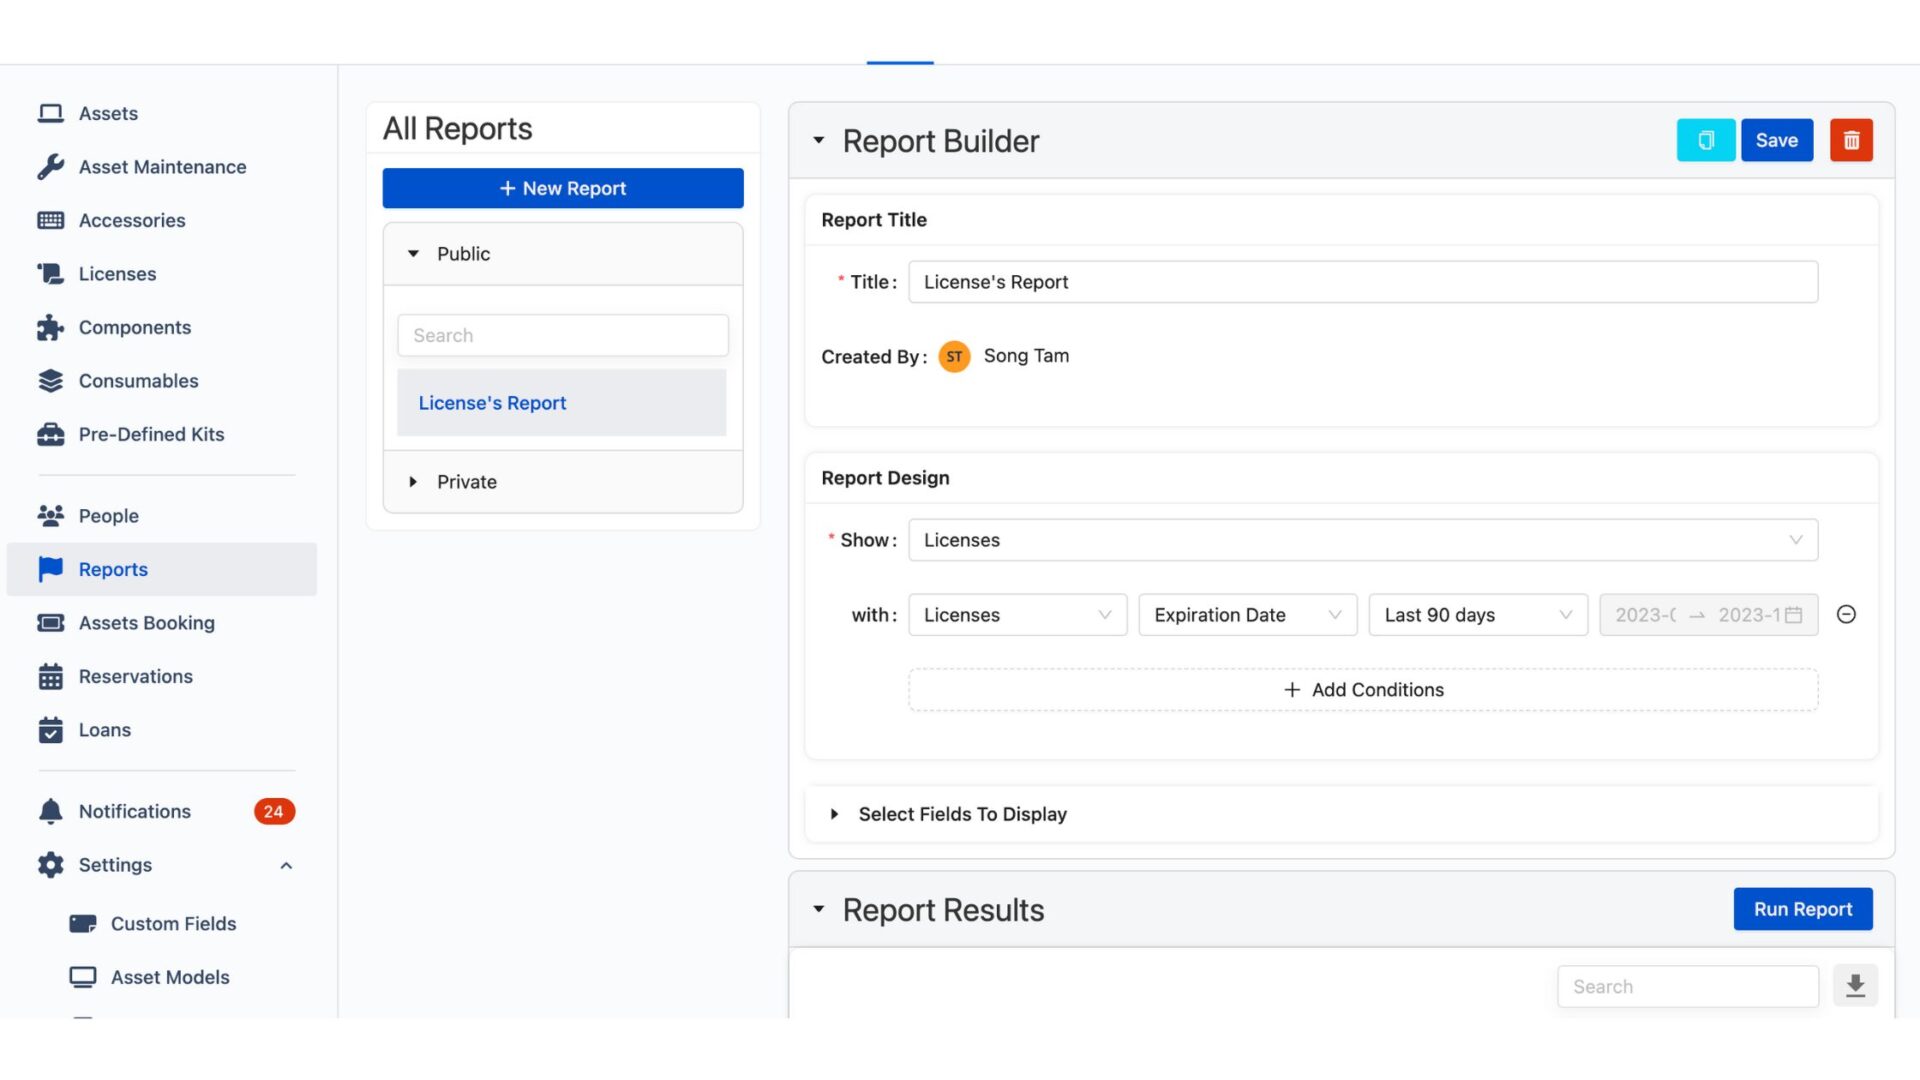 Easily get your data with a customizable report of inventory management software